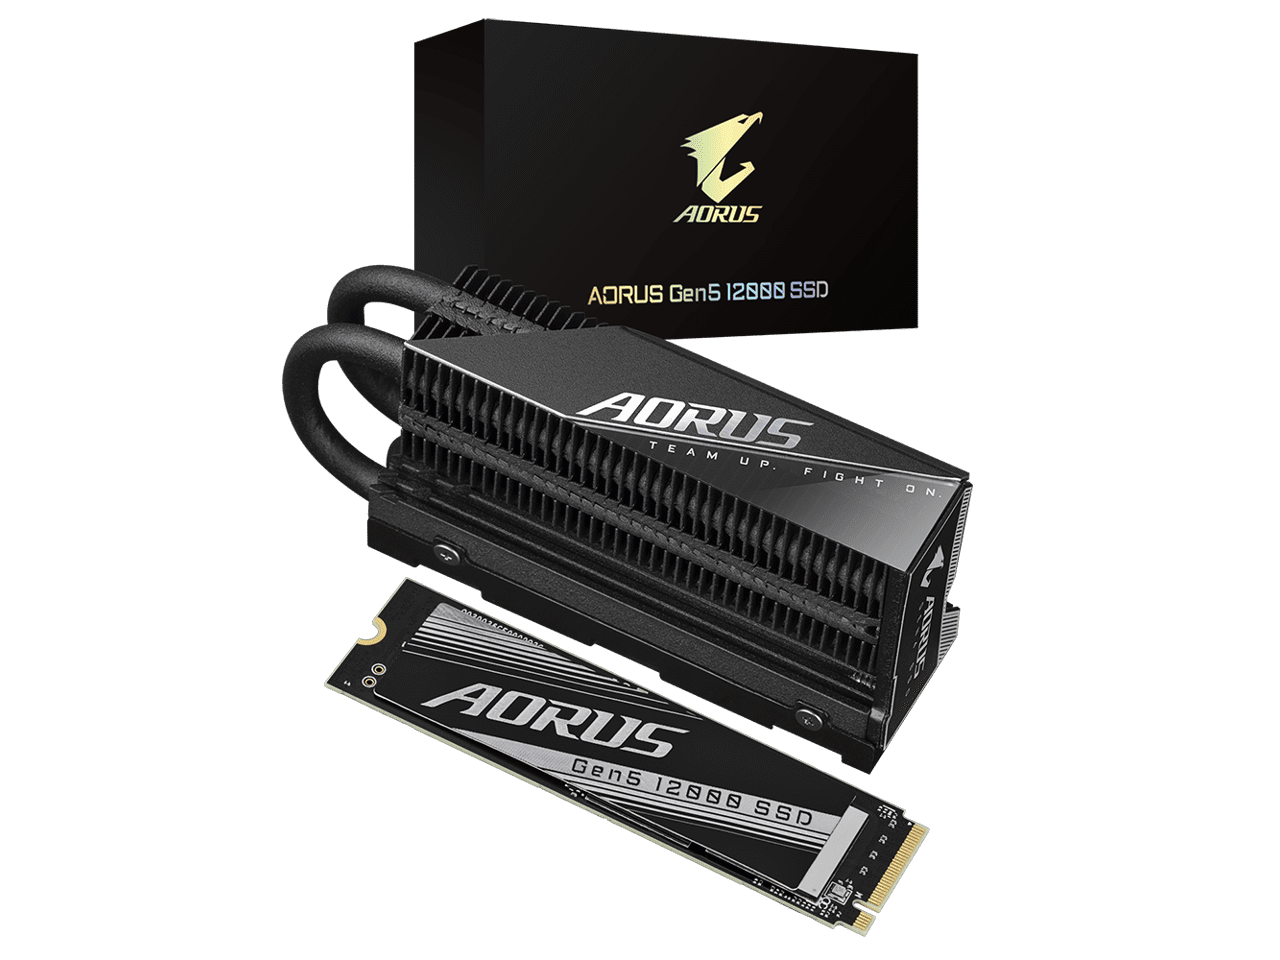 Gigabyte Aorus Gen5 10000 review: The first PCIe 5.0 SSD makes a splash